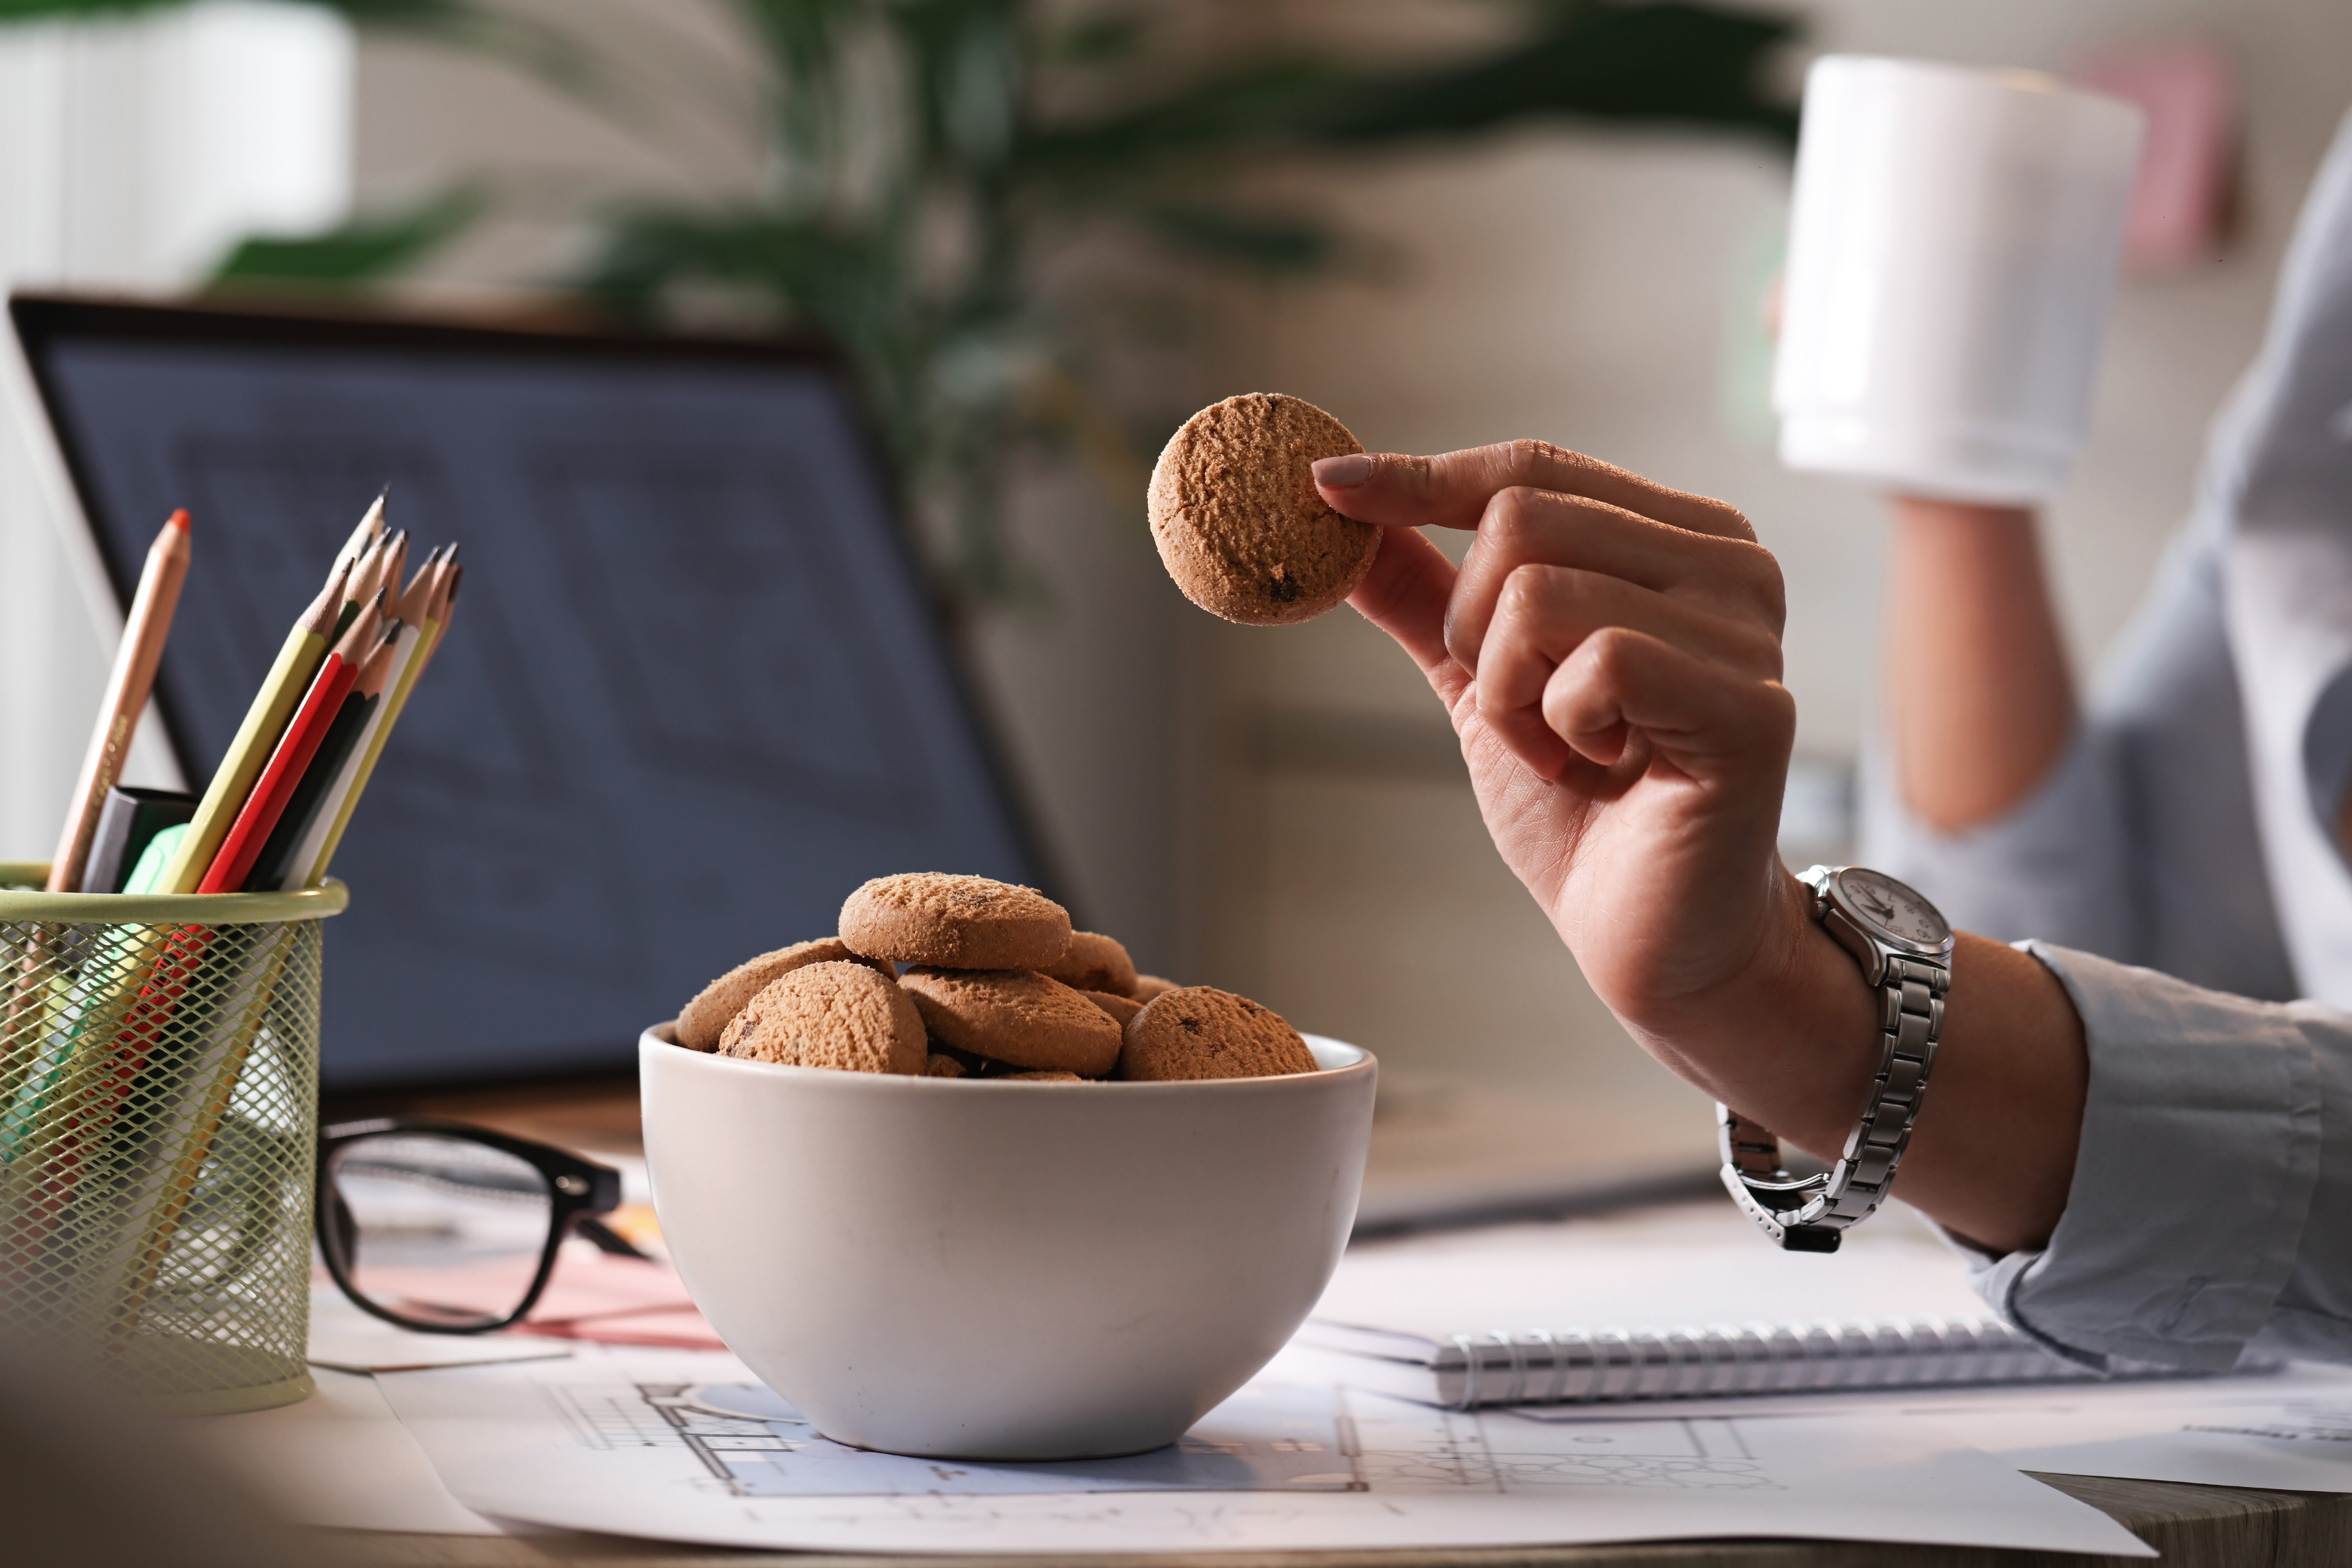 A person having cookies at the office | Source: Shutterstock